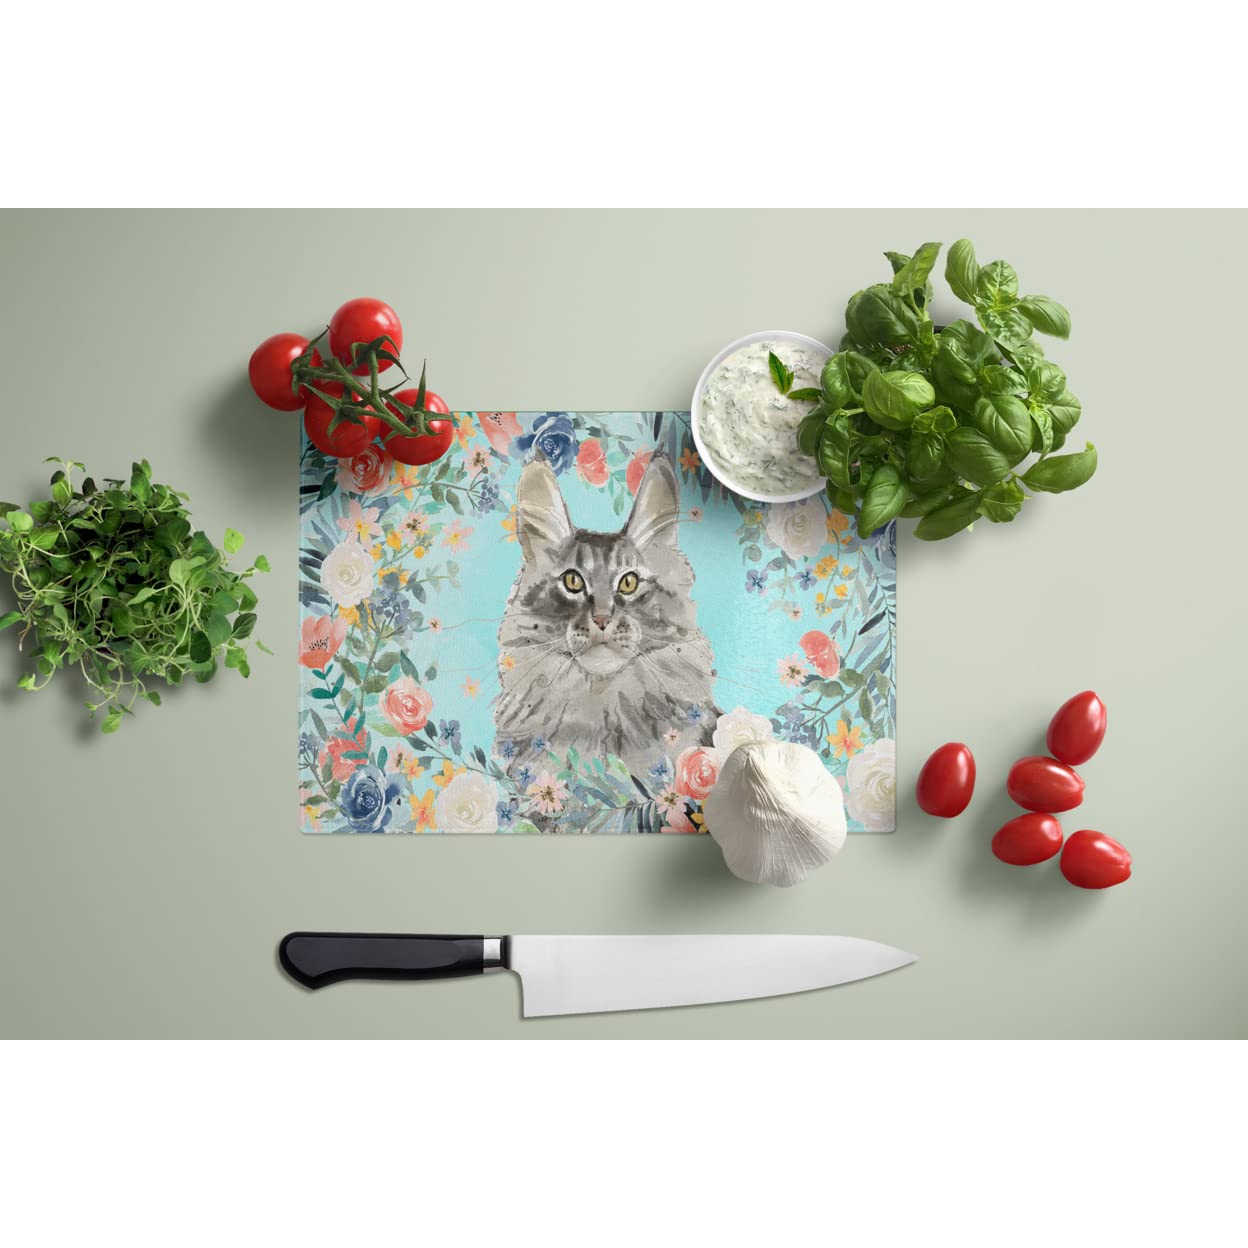 Caroline's Treasures CK3393LCB Maine Coon Spring Flowers Glass Cutting Board Large Decorative Tempered Glass Kitchen Cutting and Serving Board Large Size Chopping Board